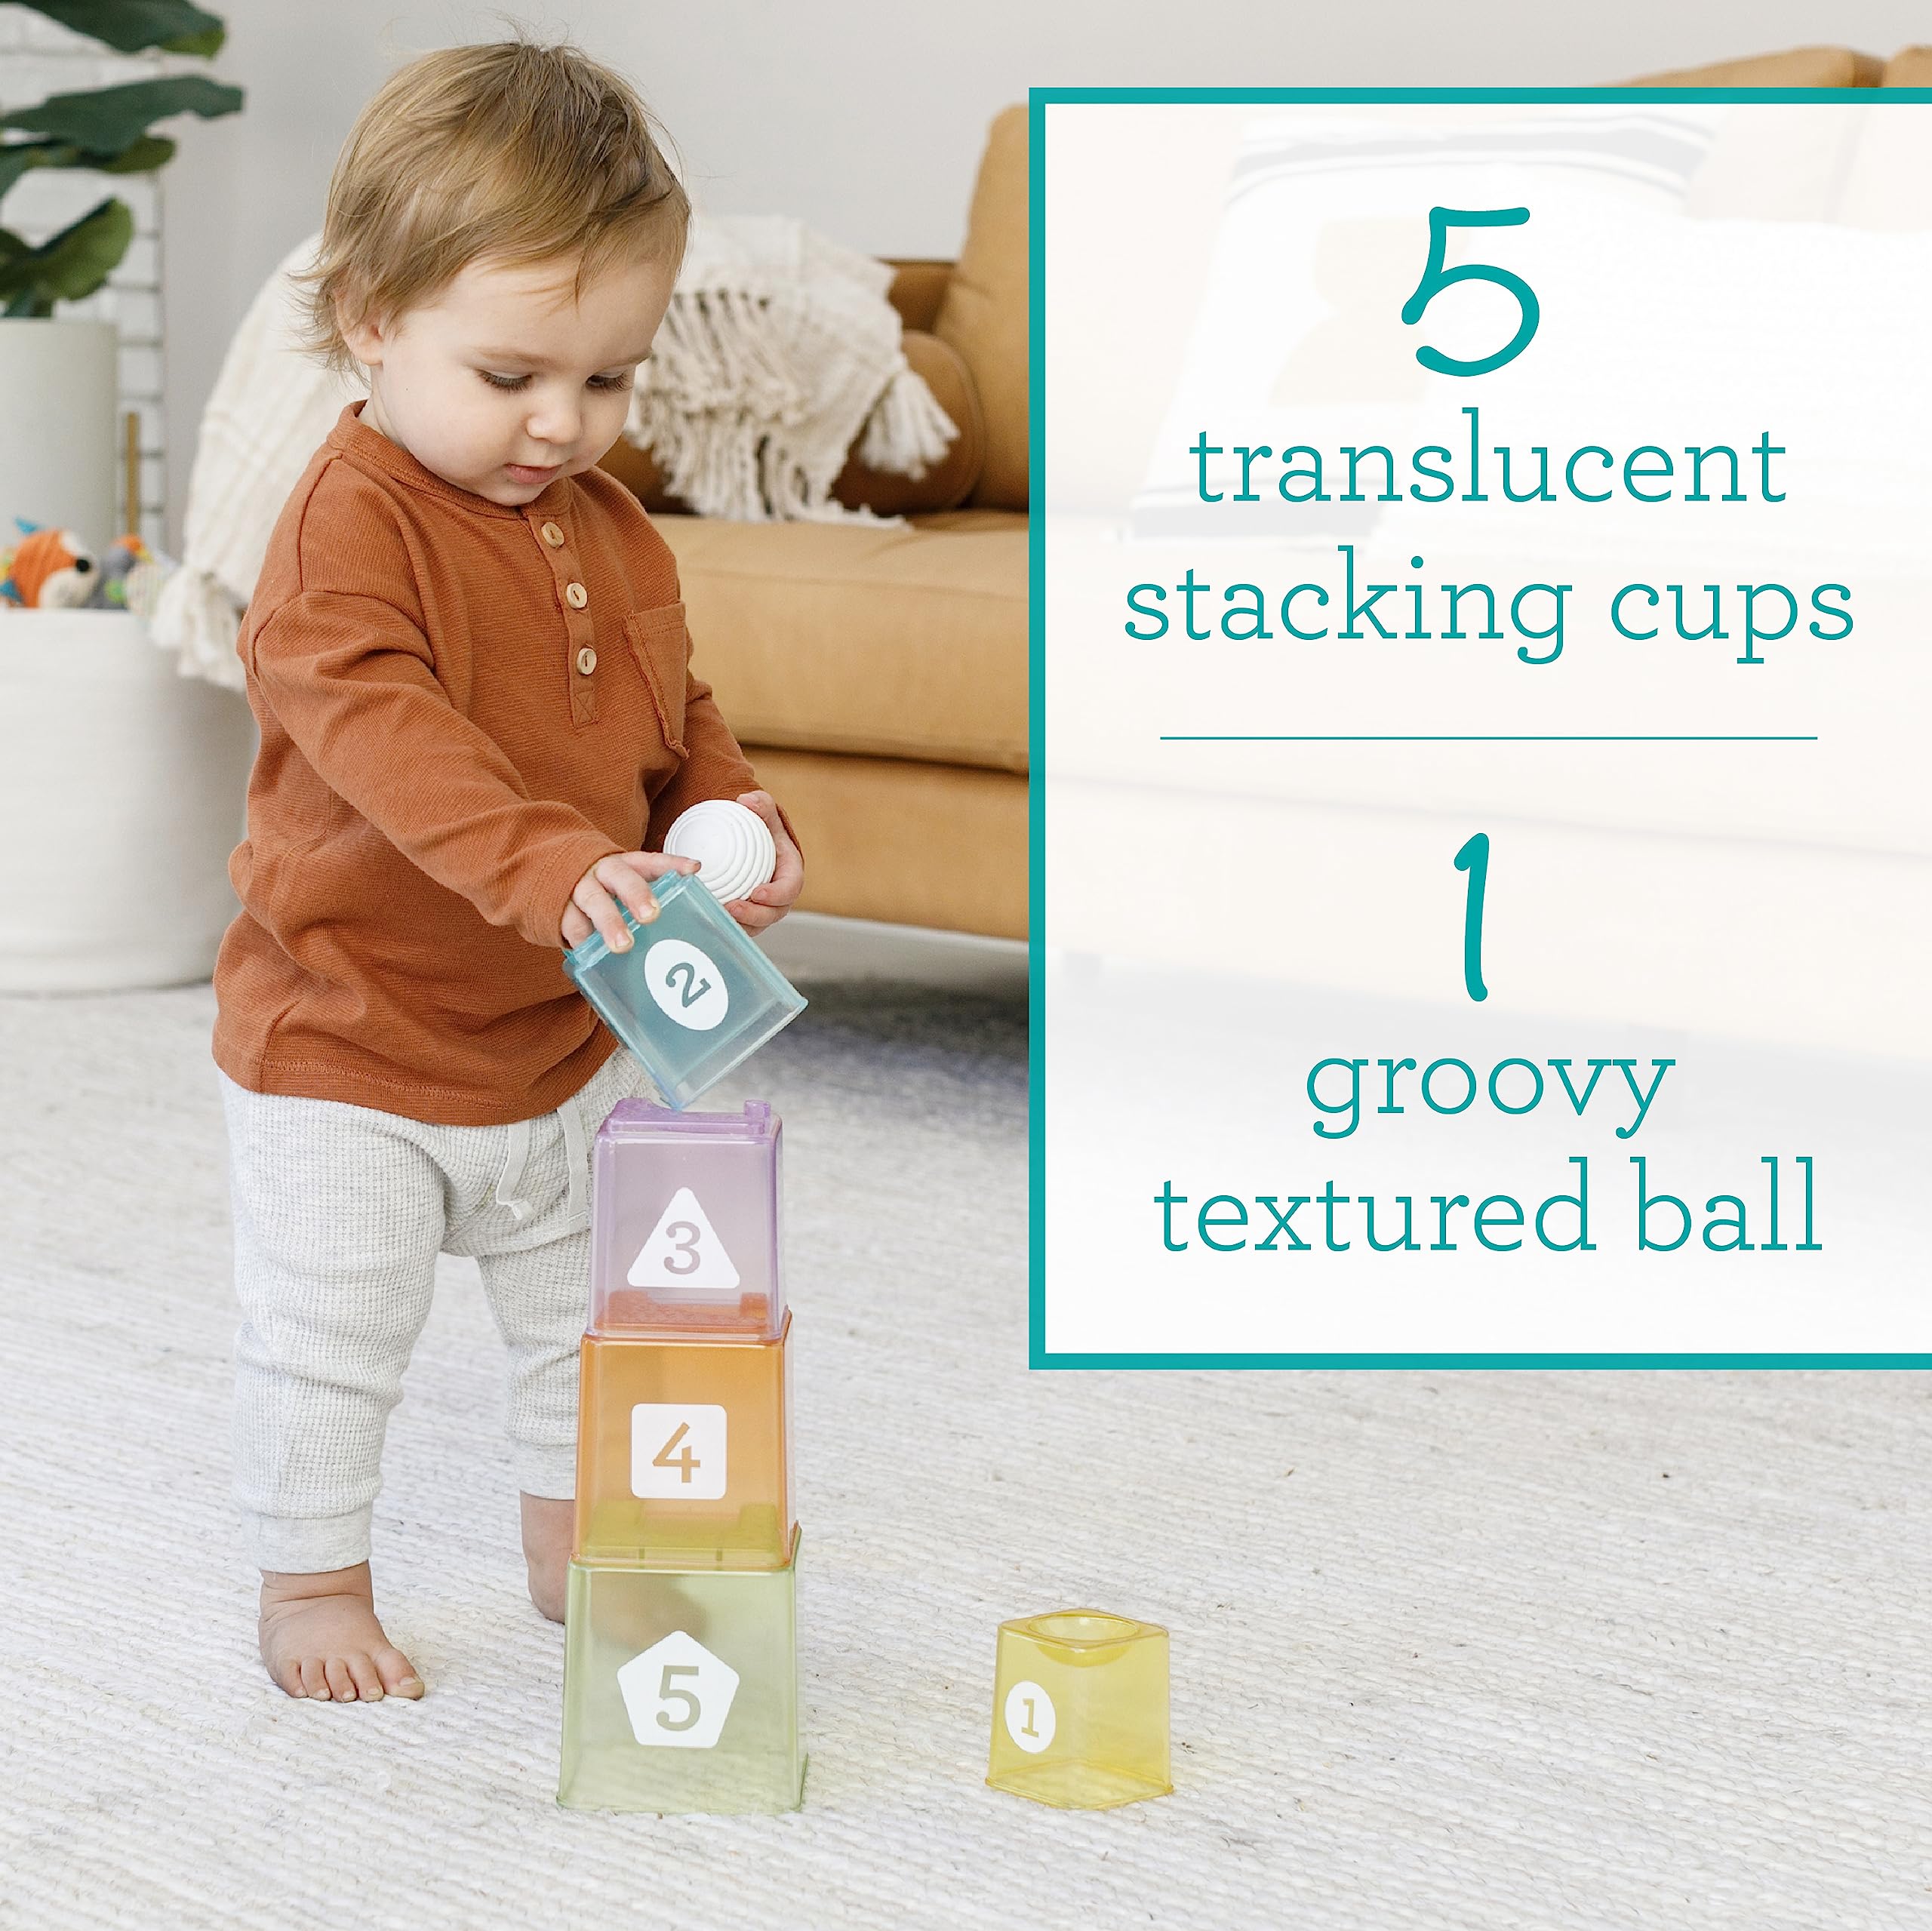 Infantino Cups & Ball Learning Set, Multicolor 6 Piece Set - Includes 1 Ball, 5 Stack & Build Cups, Ages 6 Months+